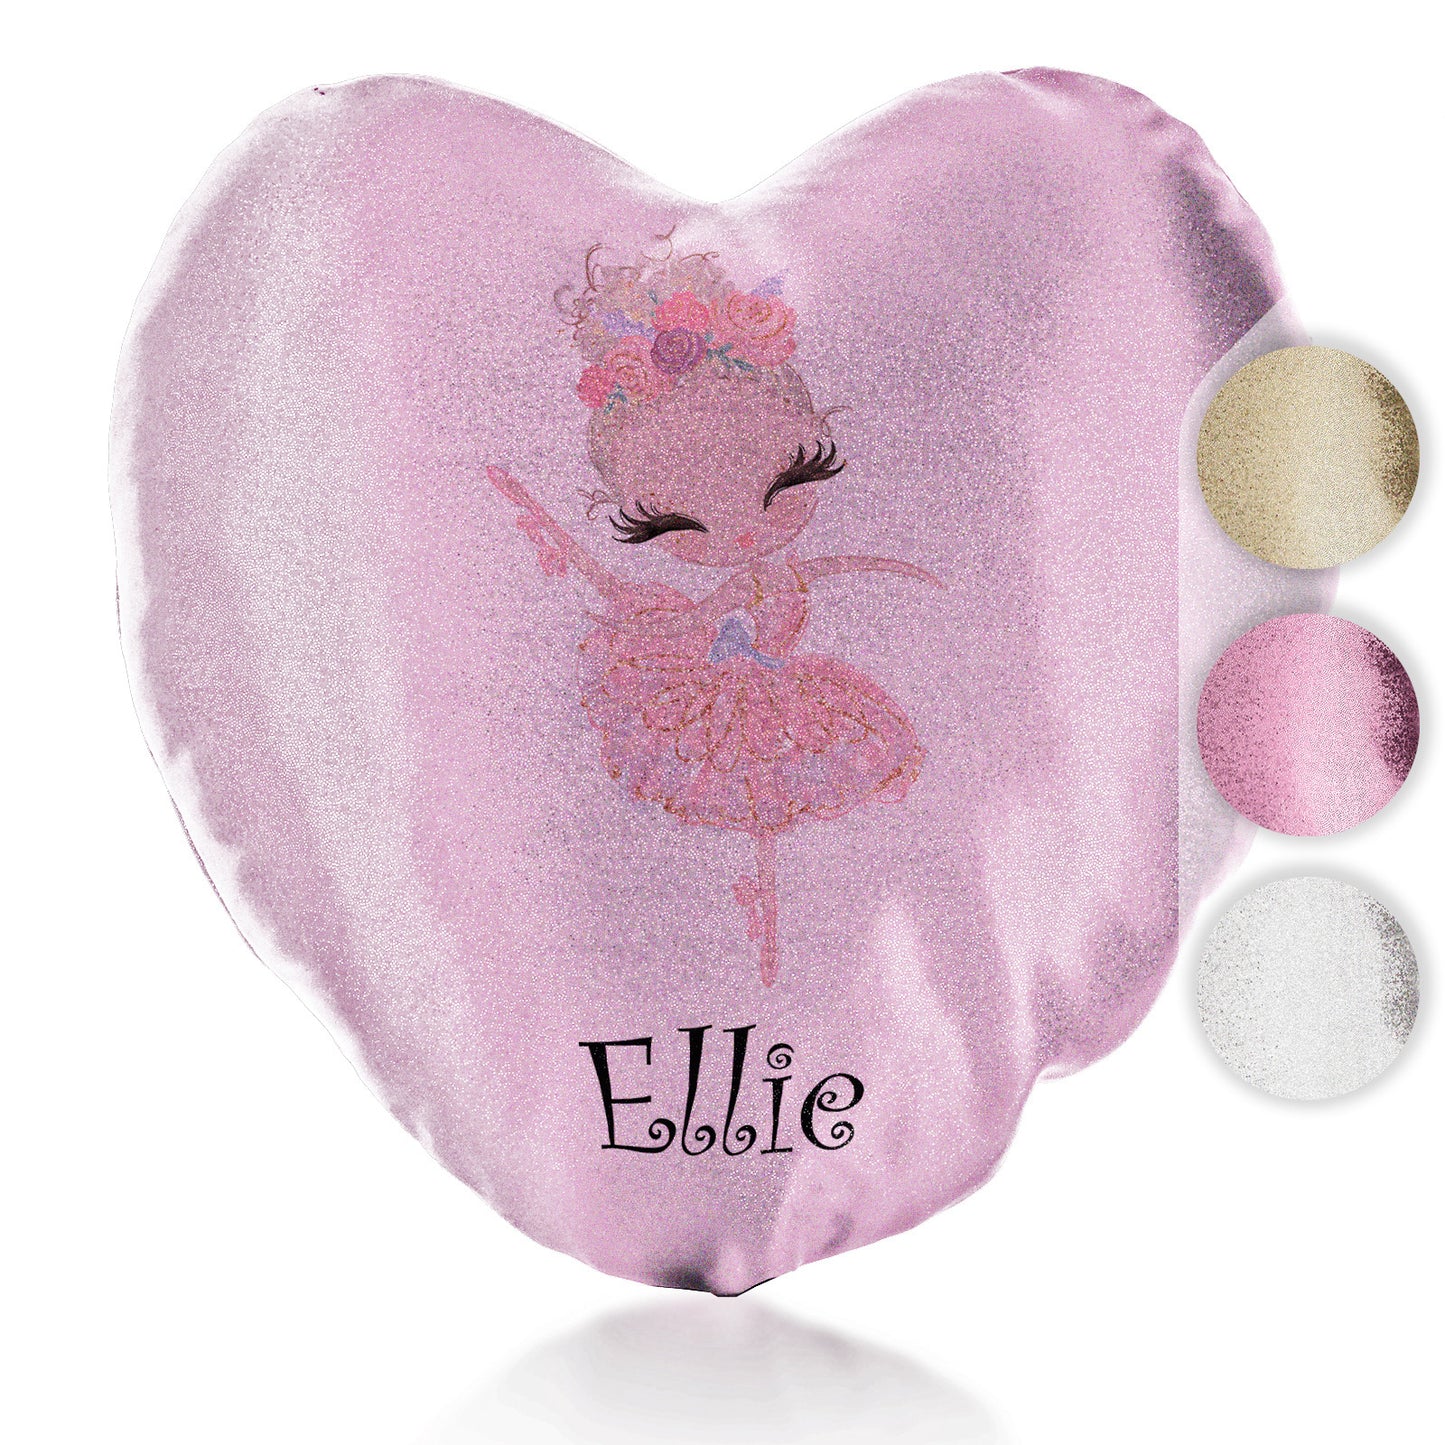 Personalised Glitter Heart Cushion with Cute Text and Blonde Hair Pink Dress Ballerina